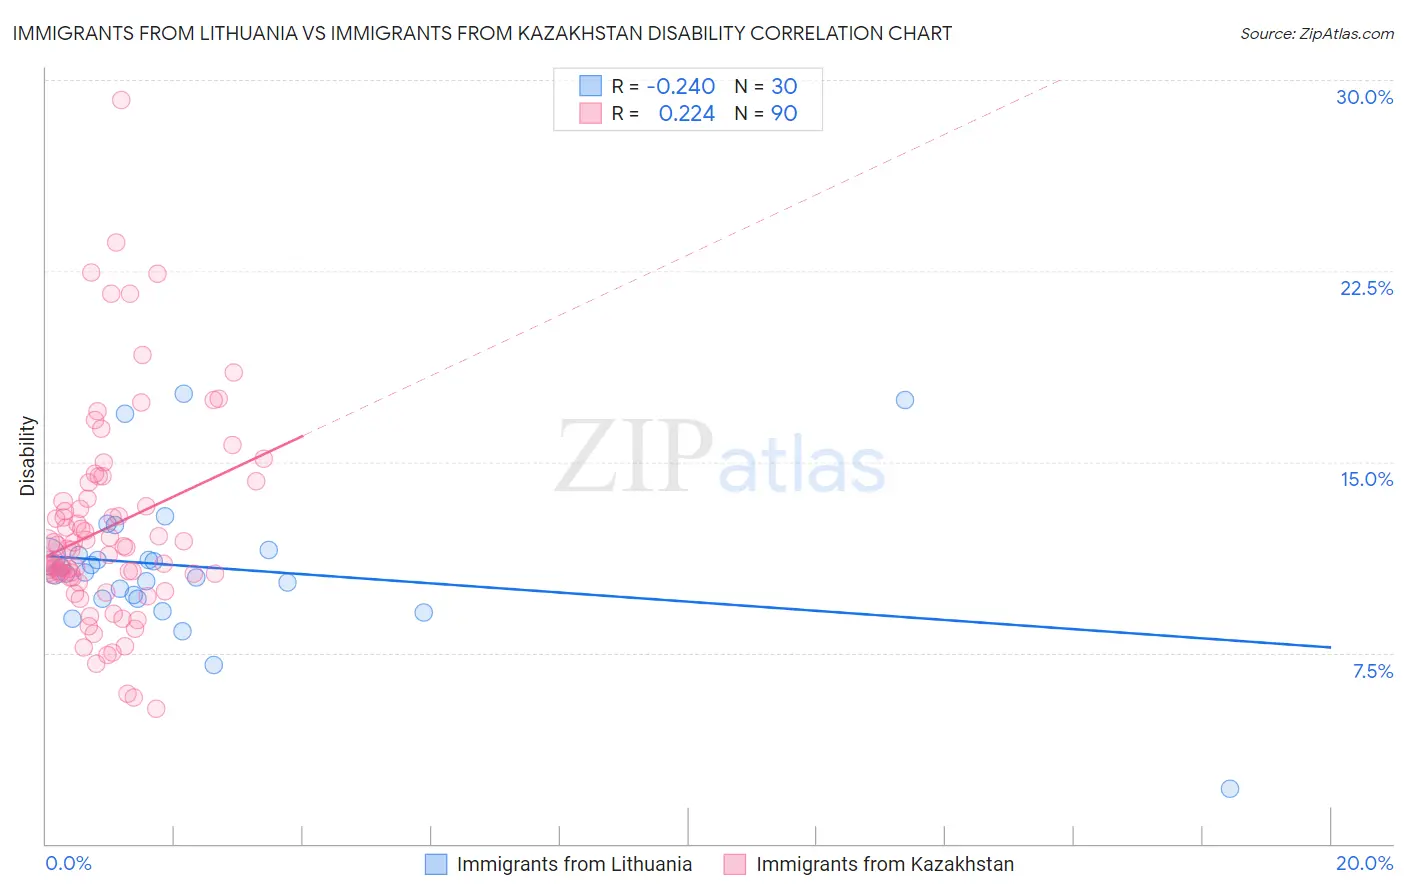 Immigrants from Lithuania vs Immigrants from Kazakhstan Disability